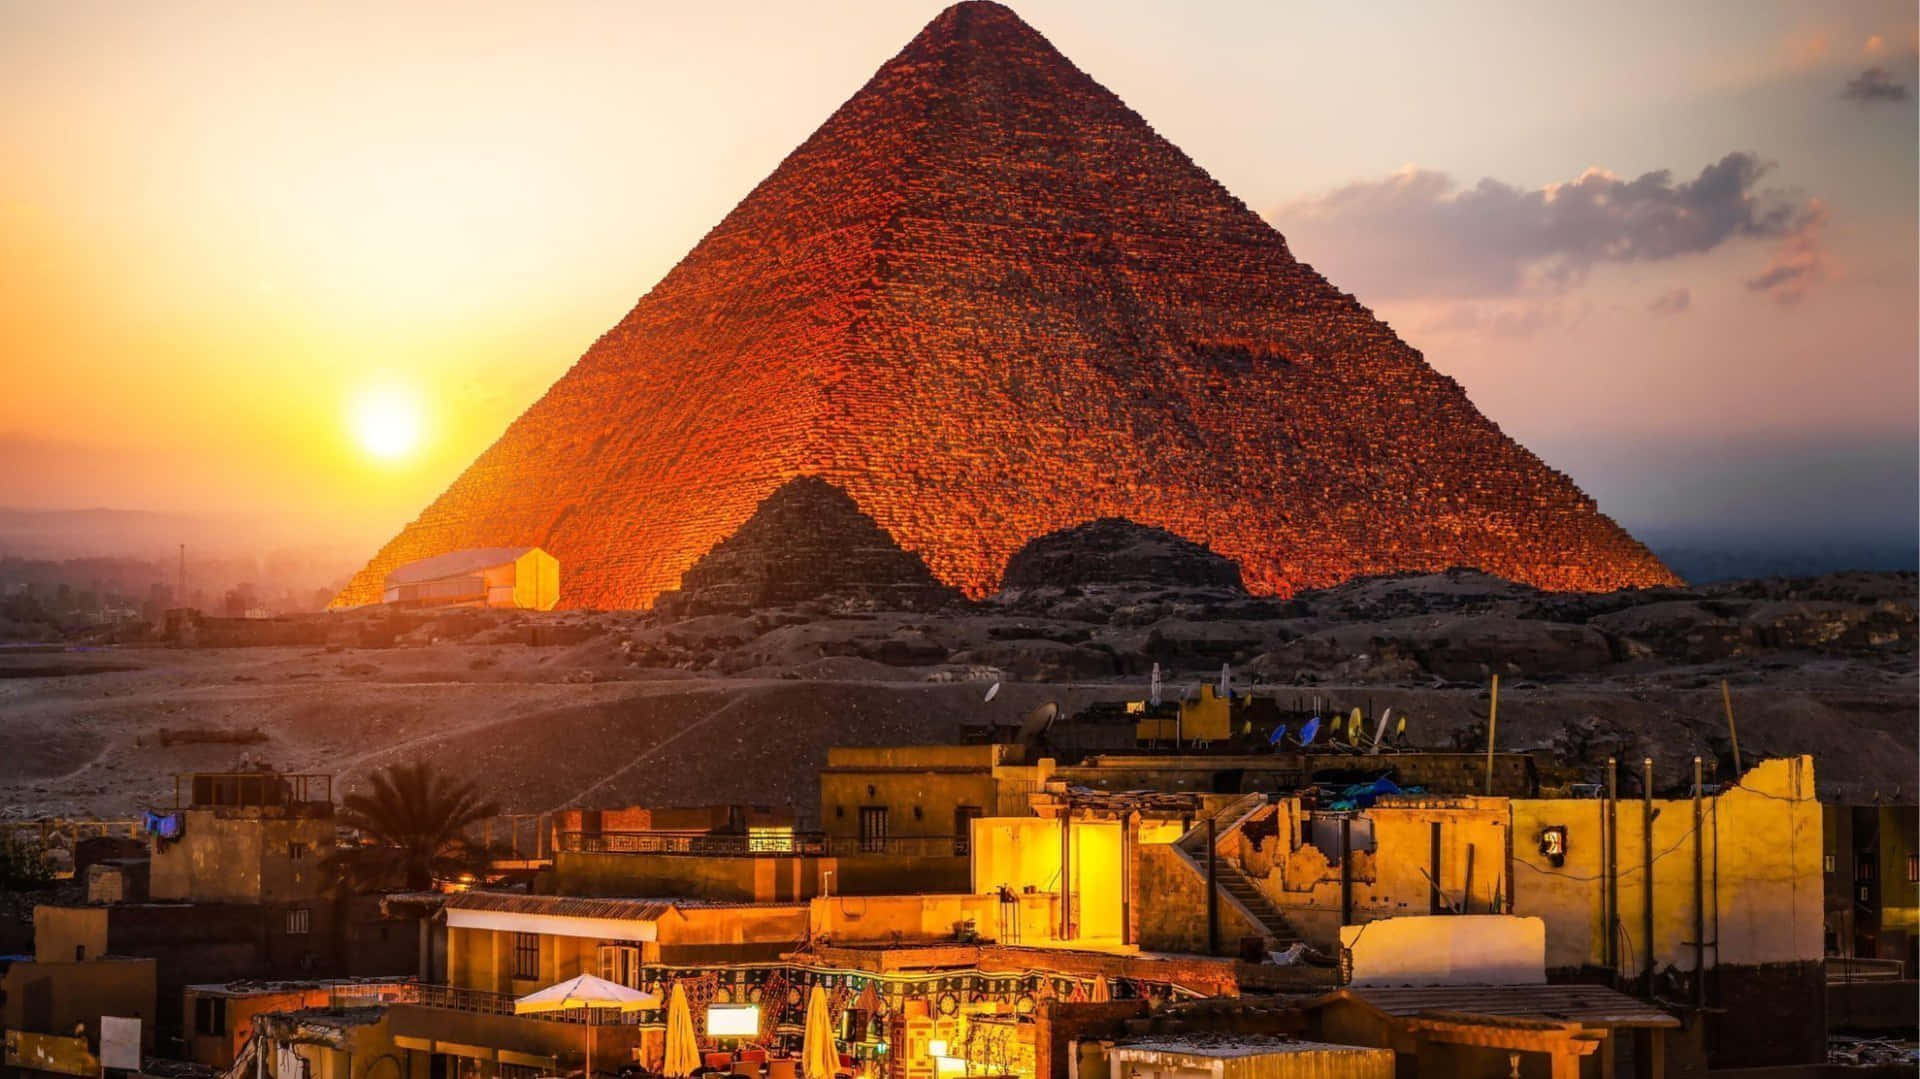 The Pyramids Of Giza Menkaure Pyramid Against The Sunset Wallpaper